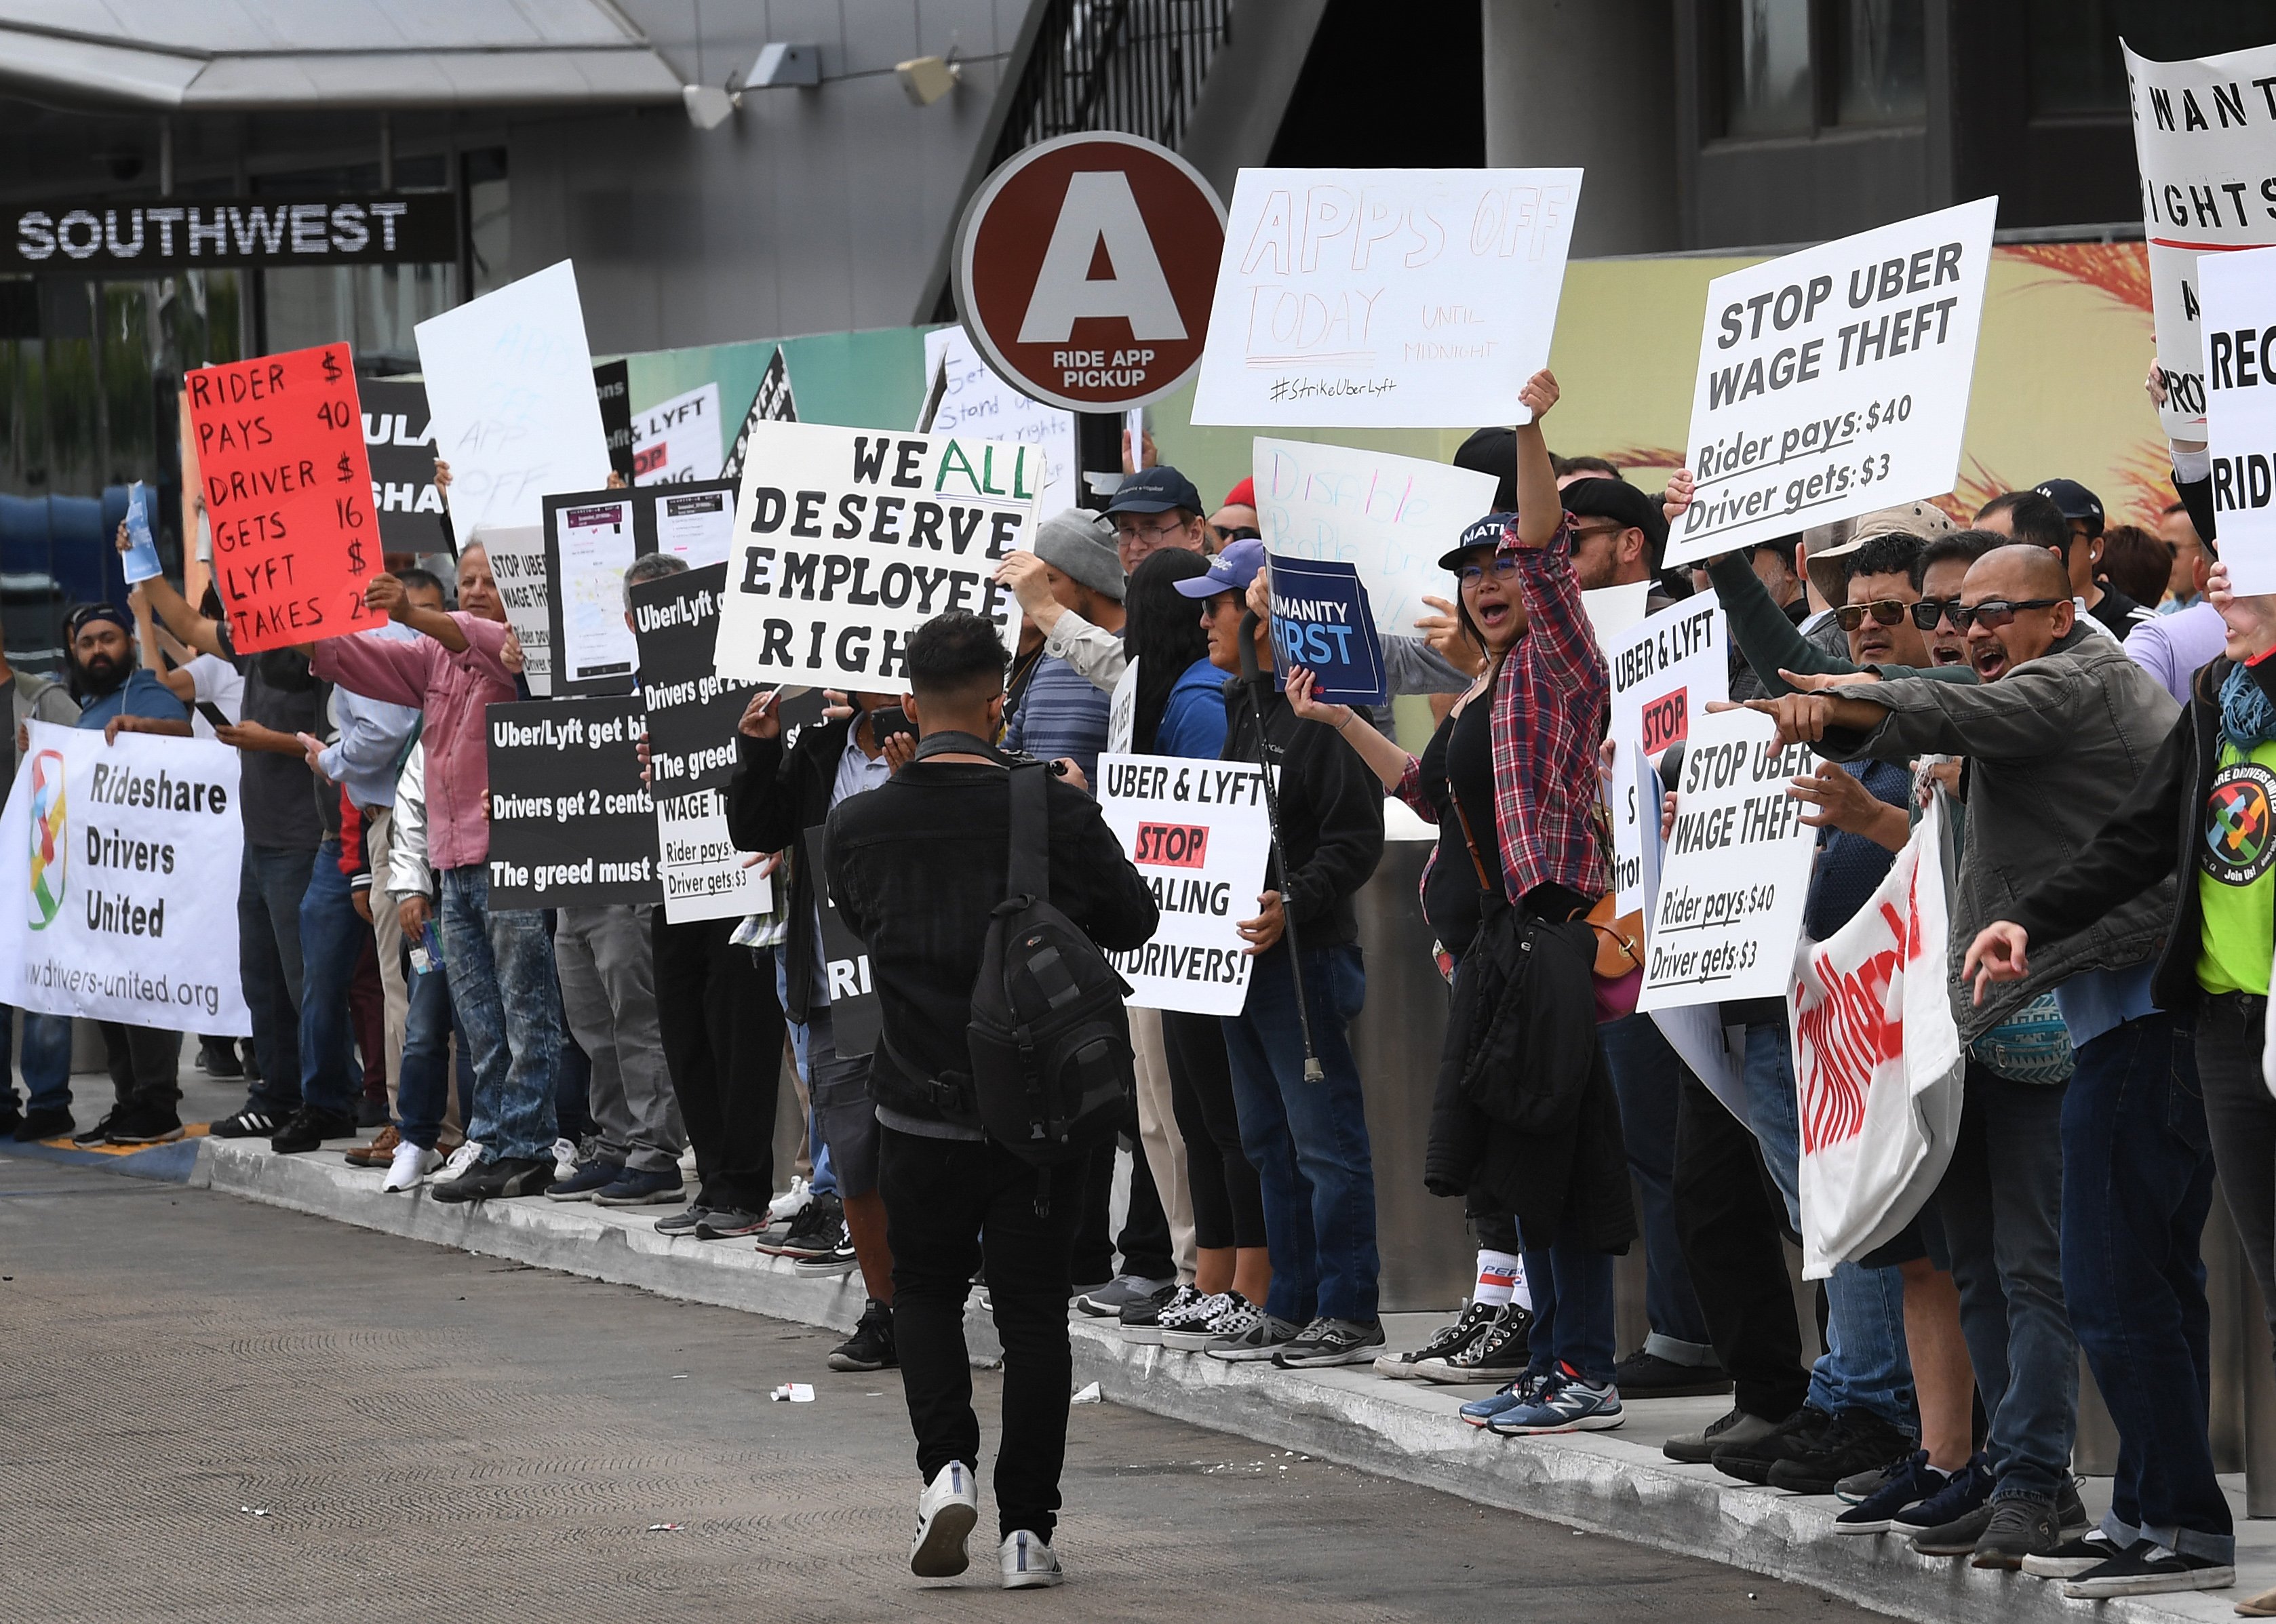 Rideshare drivers for Uber and Lyft stage a strike and protest at the LAX International Airport, over what they say are unfair wages in Los Angeles, California on May 8, 2019. - One of the early promises of the ride-hailing era ushered in by Uber and Lyft was that the new entrants would complement public transit, reduce car ownership and help alleviate congestion. But a new study on San Francisco has found the opposite may be in fact be true: far from reducing traffic, the companies increased delays by 40 percent as commuters ditched buses or walking for mobile-app summoned rides. (Photo by Mark RALSTON / AFP) (Photo credit should read MARK RALSTON/AFP/Getty Images)